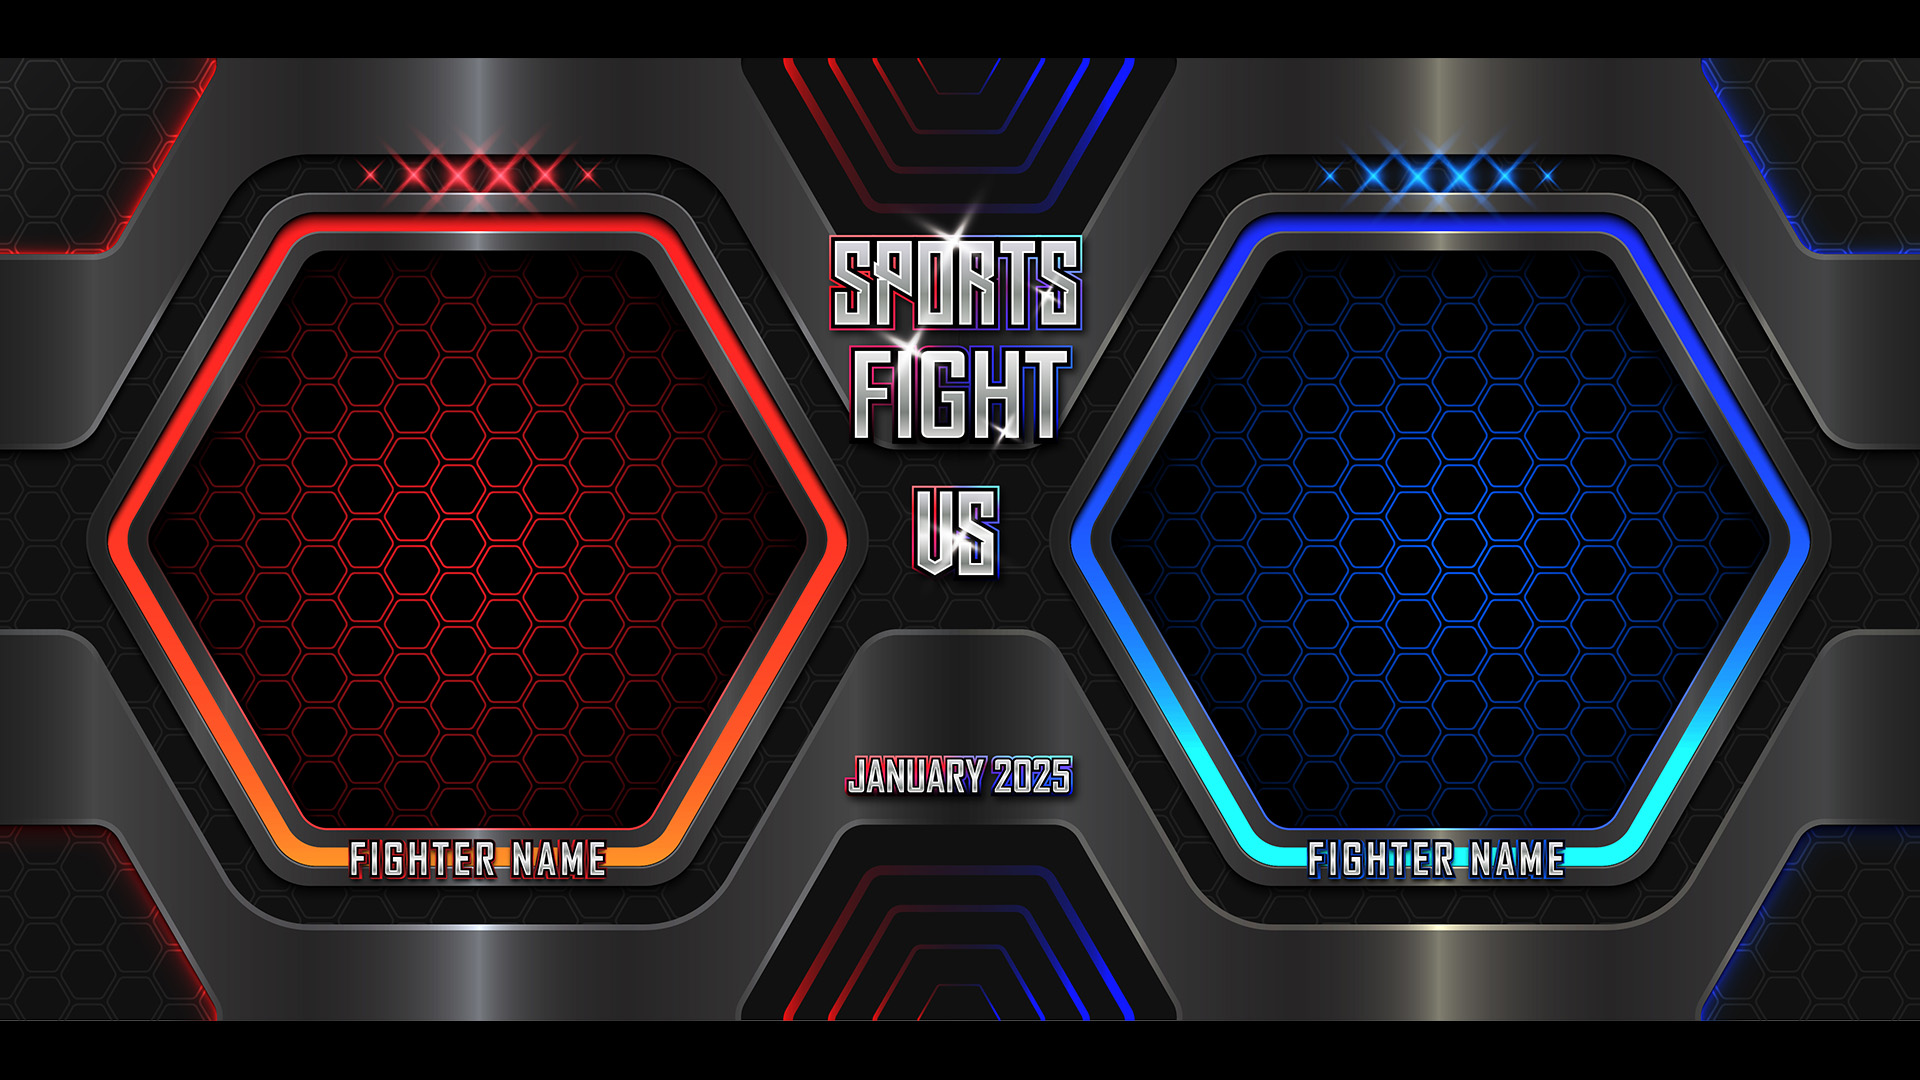 10 Sports Fight Posters and Backgrounds in 3D Realistic Style, two hexagons.